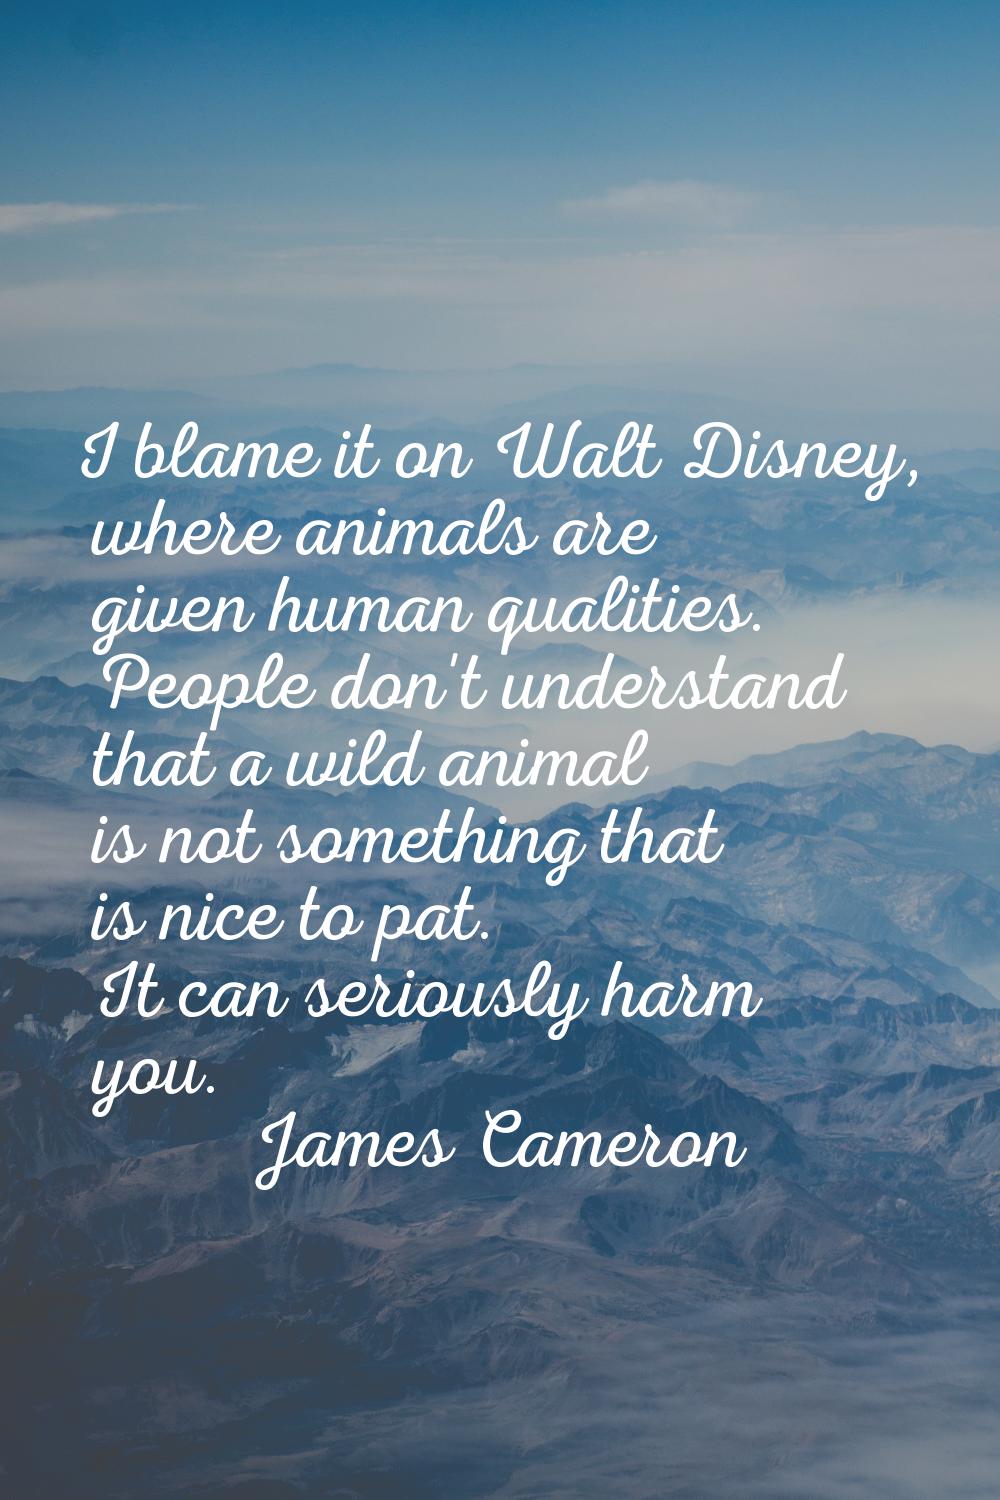 I blame it on Walt Disney, where animals are given human qualities. People don't understand that a 